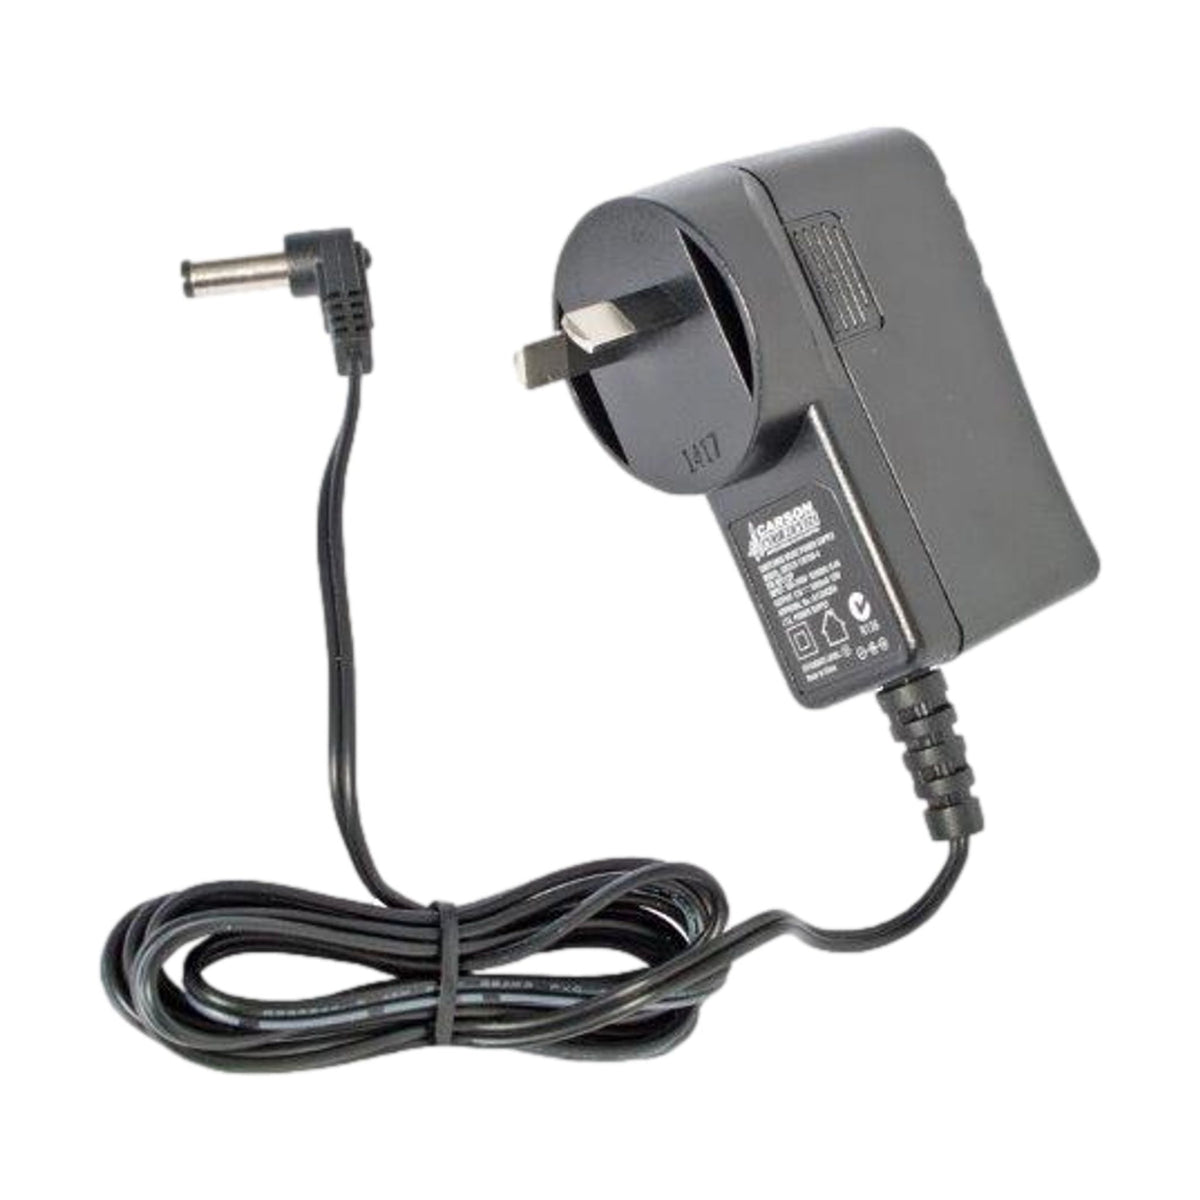 Carson Cable Co Powerplay Power Adapter Center Negative 12V DC 2.1mm